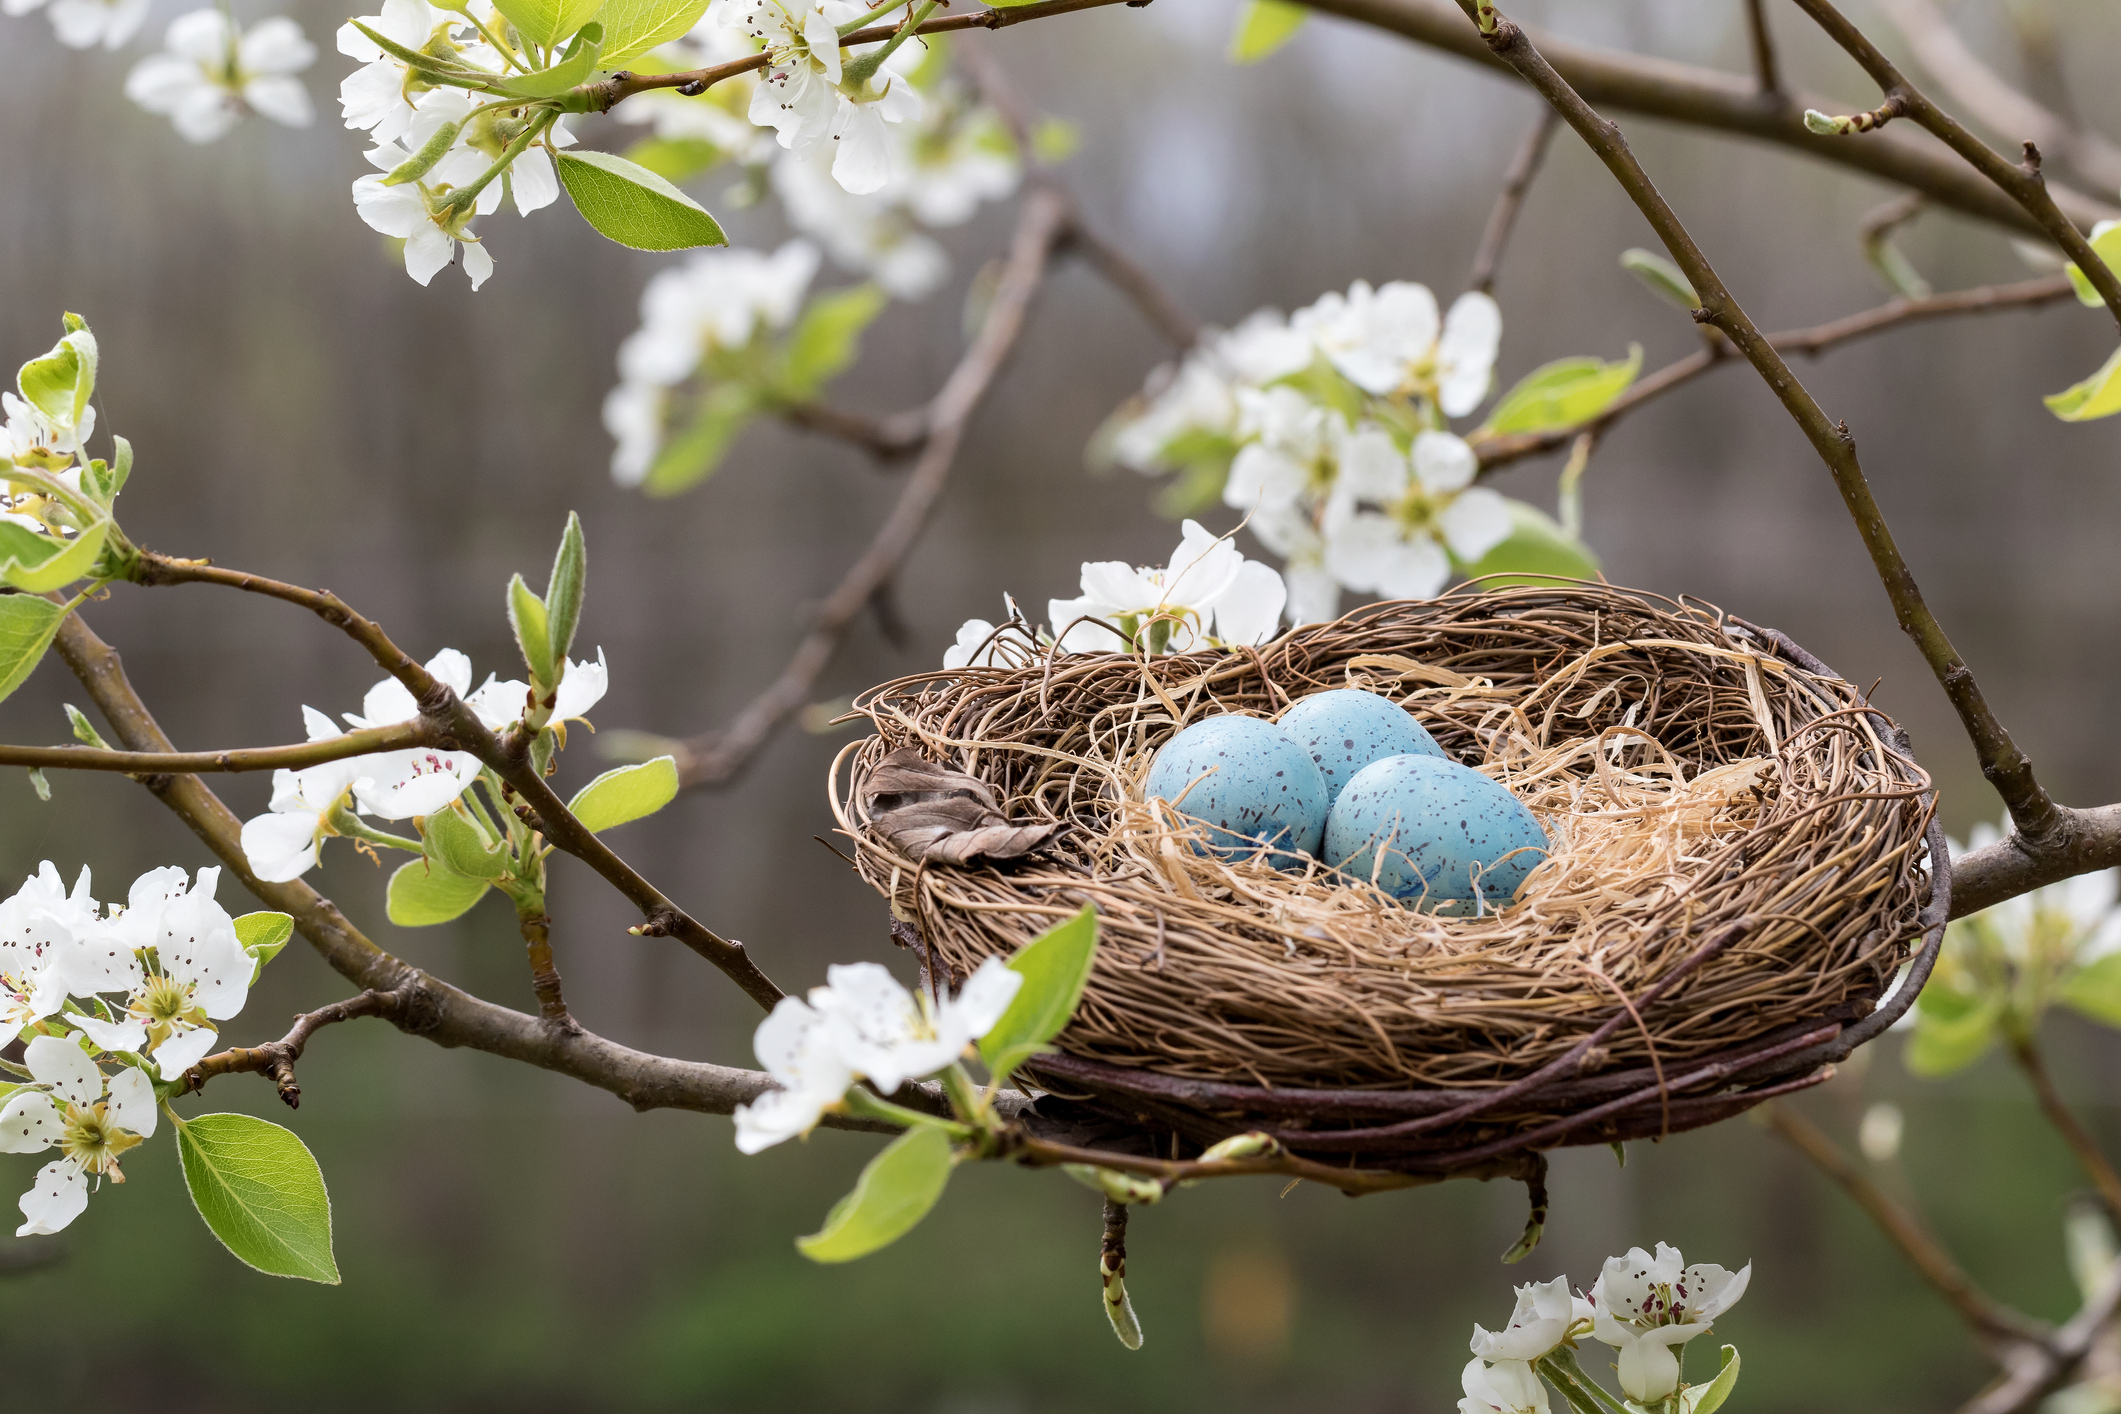 A guide to bird nests: how, where and why birds make nests